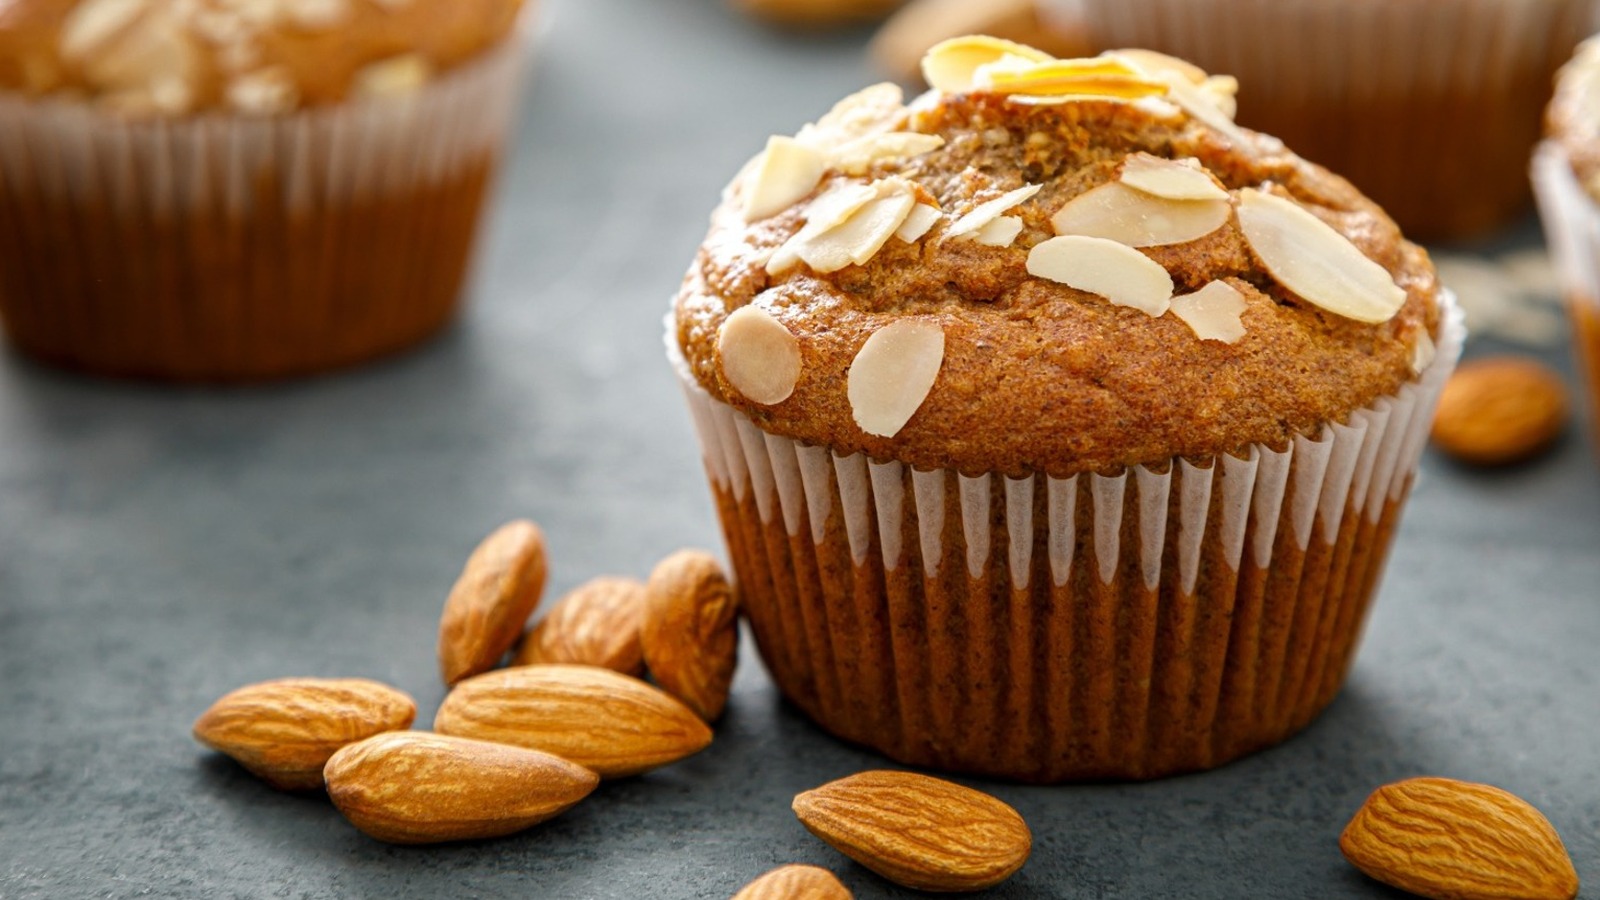 https://www.foodrepublic.com/img/gallery/19-tips-you-need-to-bake-better-muffins/l-intro-1686684401.jpg